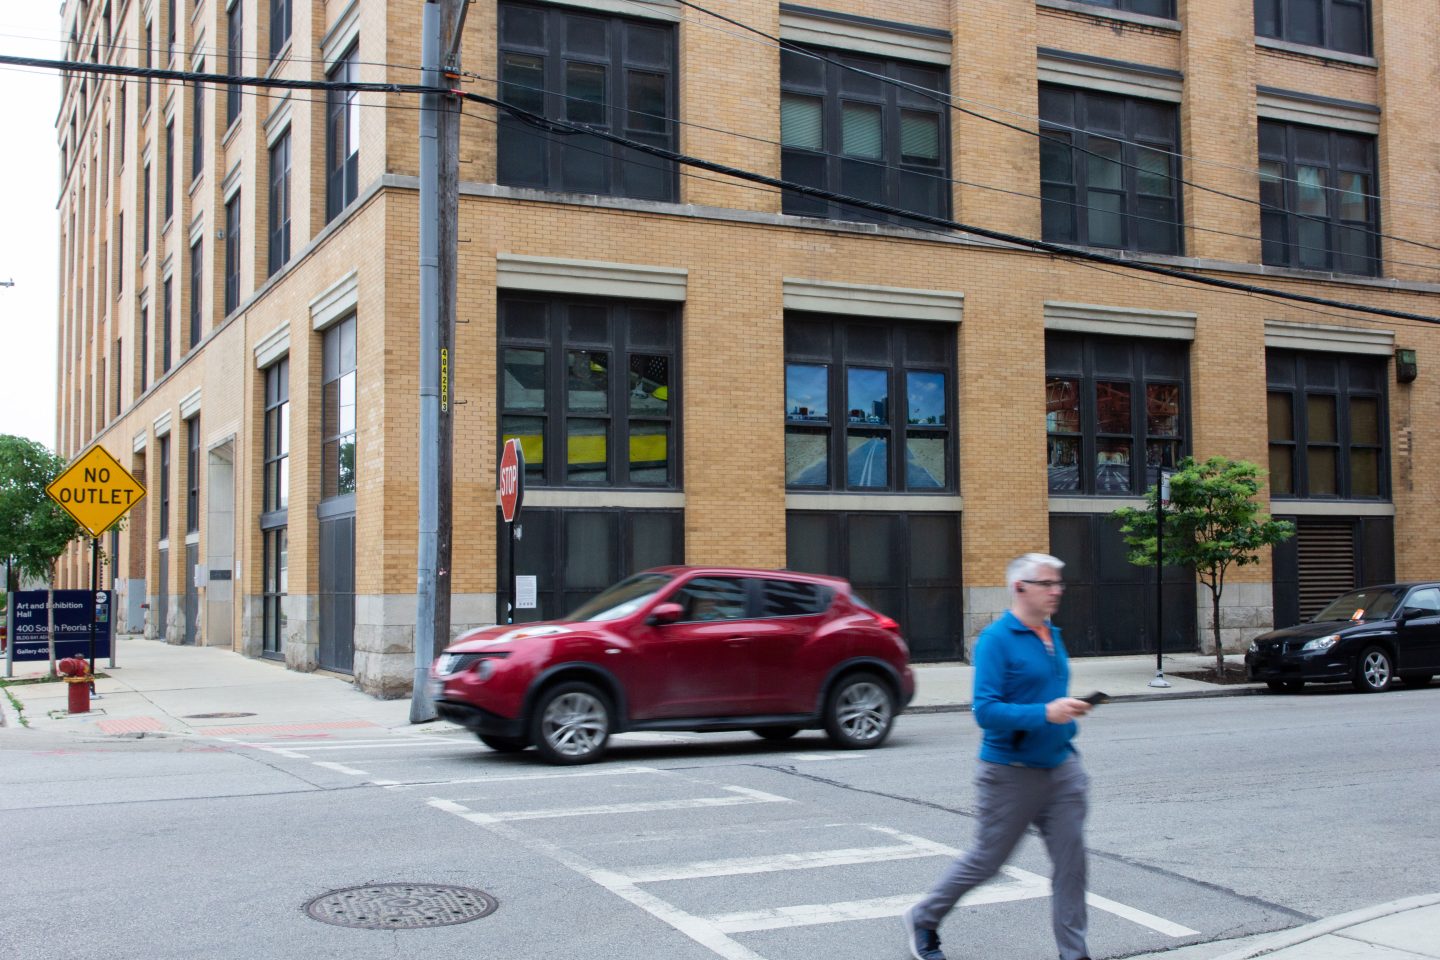 A red car and a person are crossing the street in front of the corner of a building.